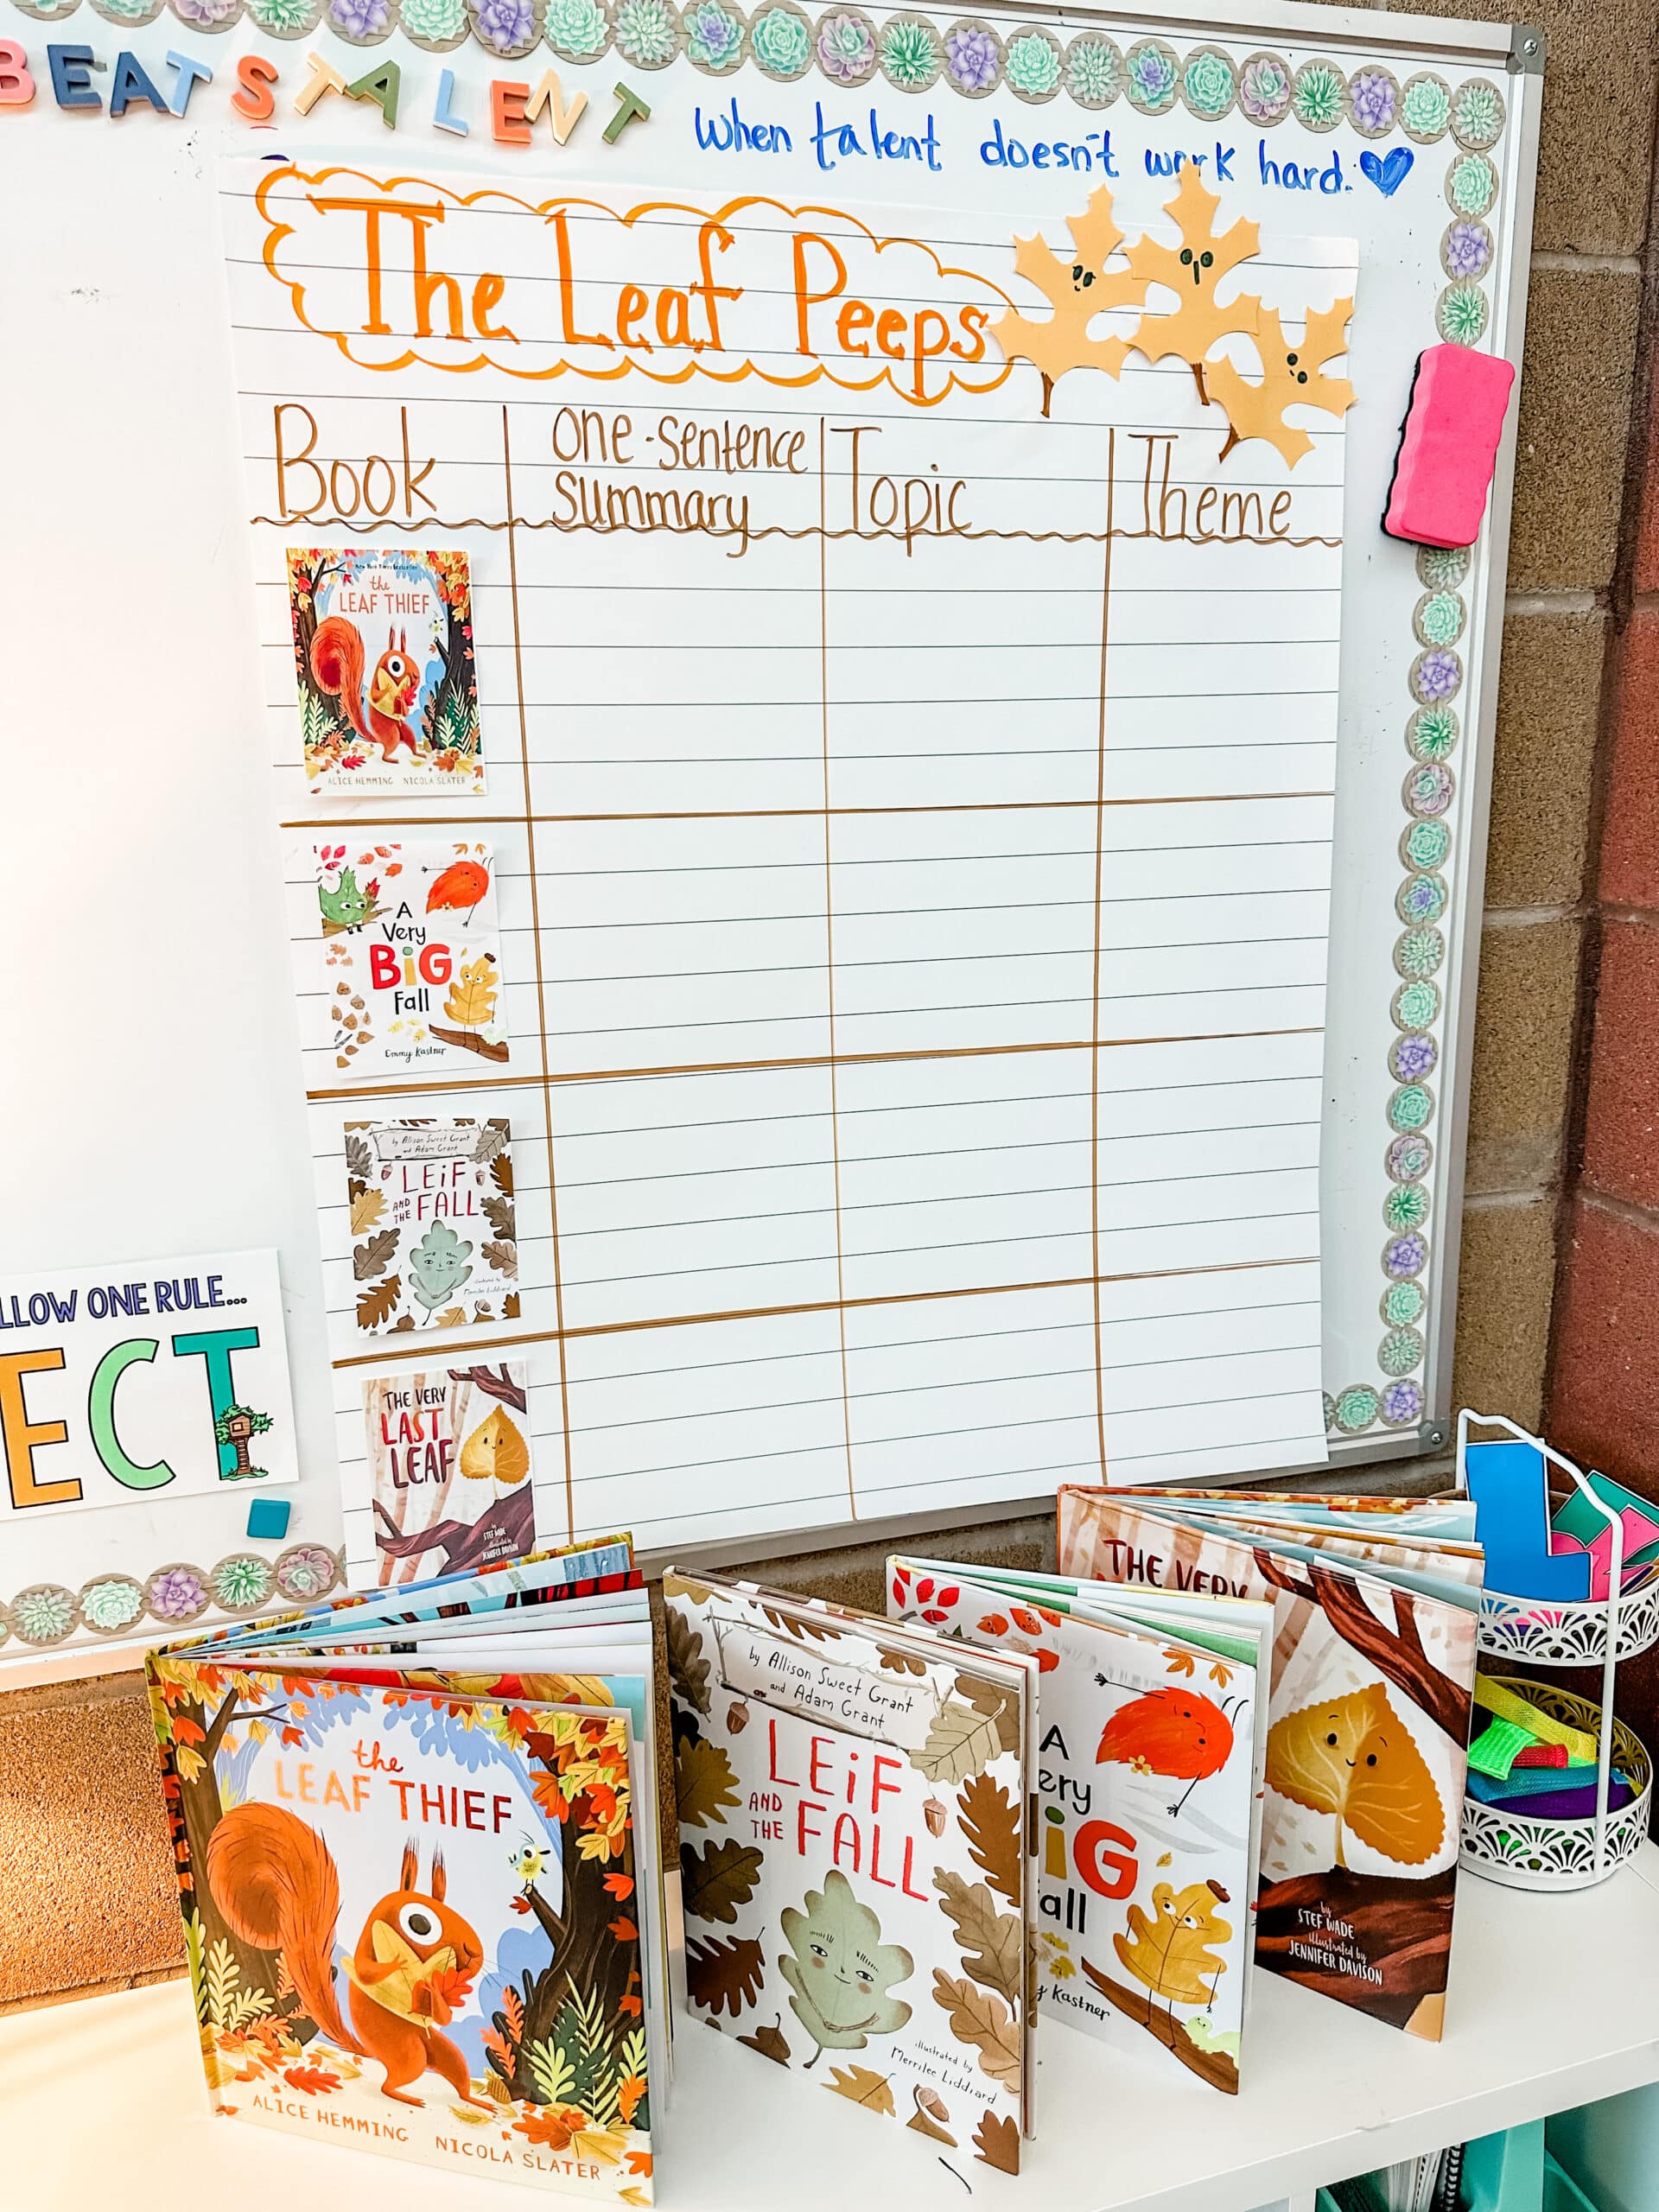 fall picture books anchor chart for writing one-sentence main idea summaries of each book, determining the overarching topic, and then identifying the theme of each story.